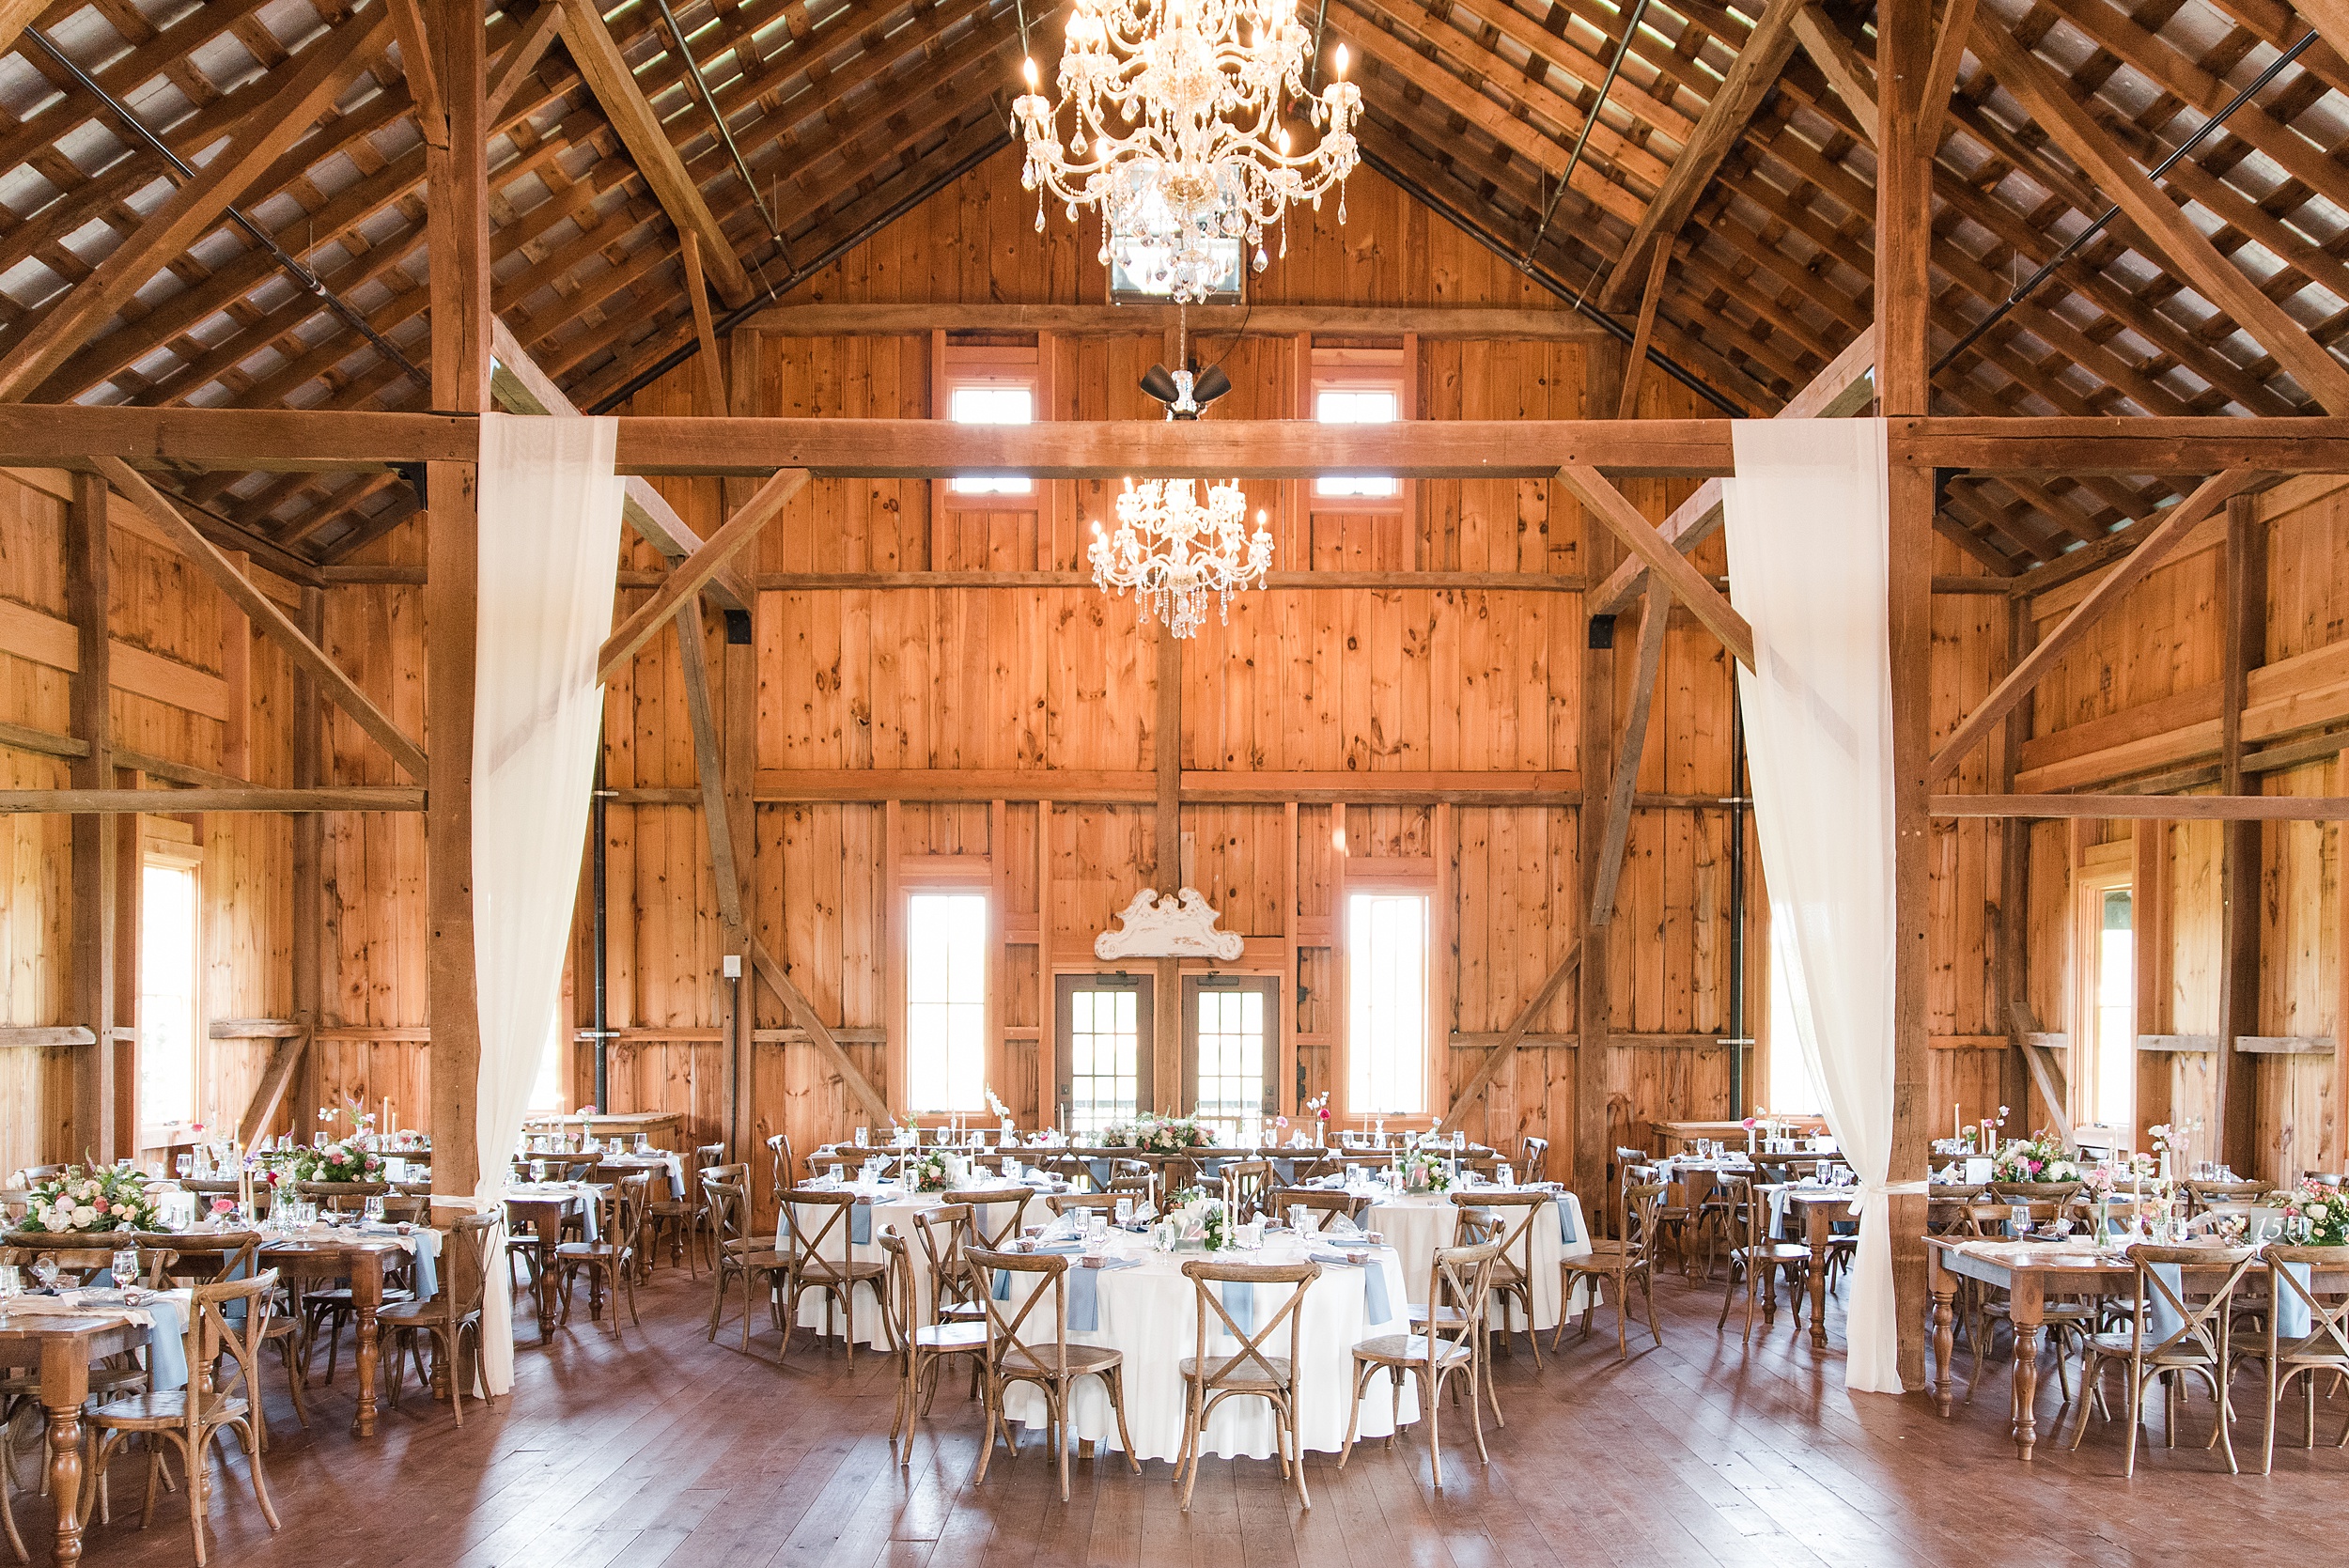 A view of a wedding reception set up in the barn of the Bluebird Manor wedding venue